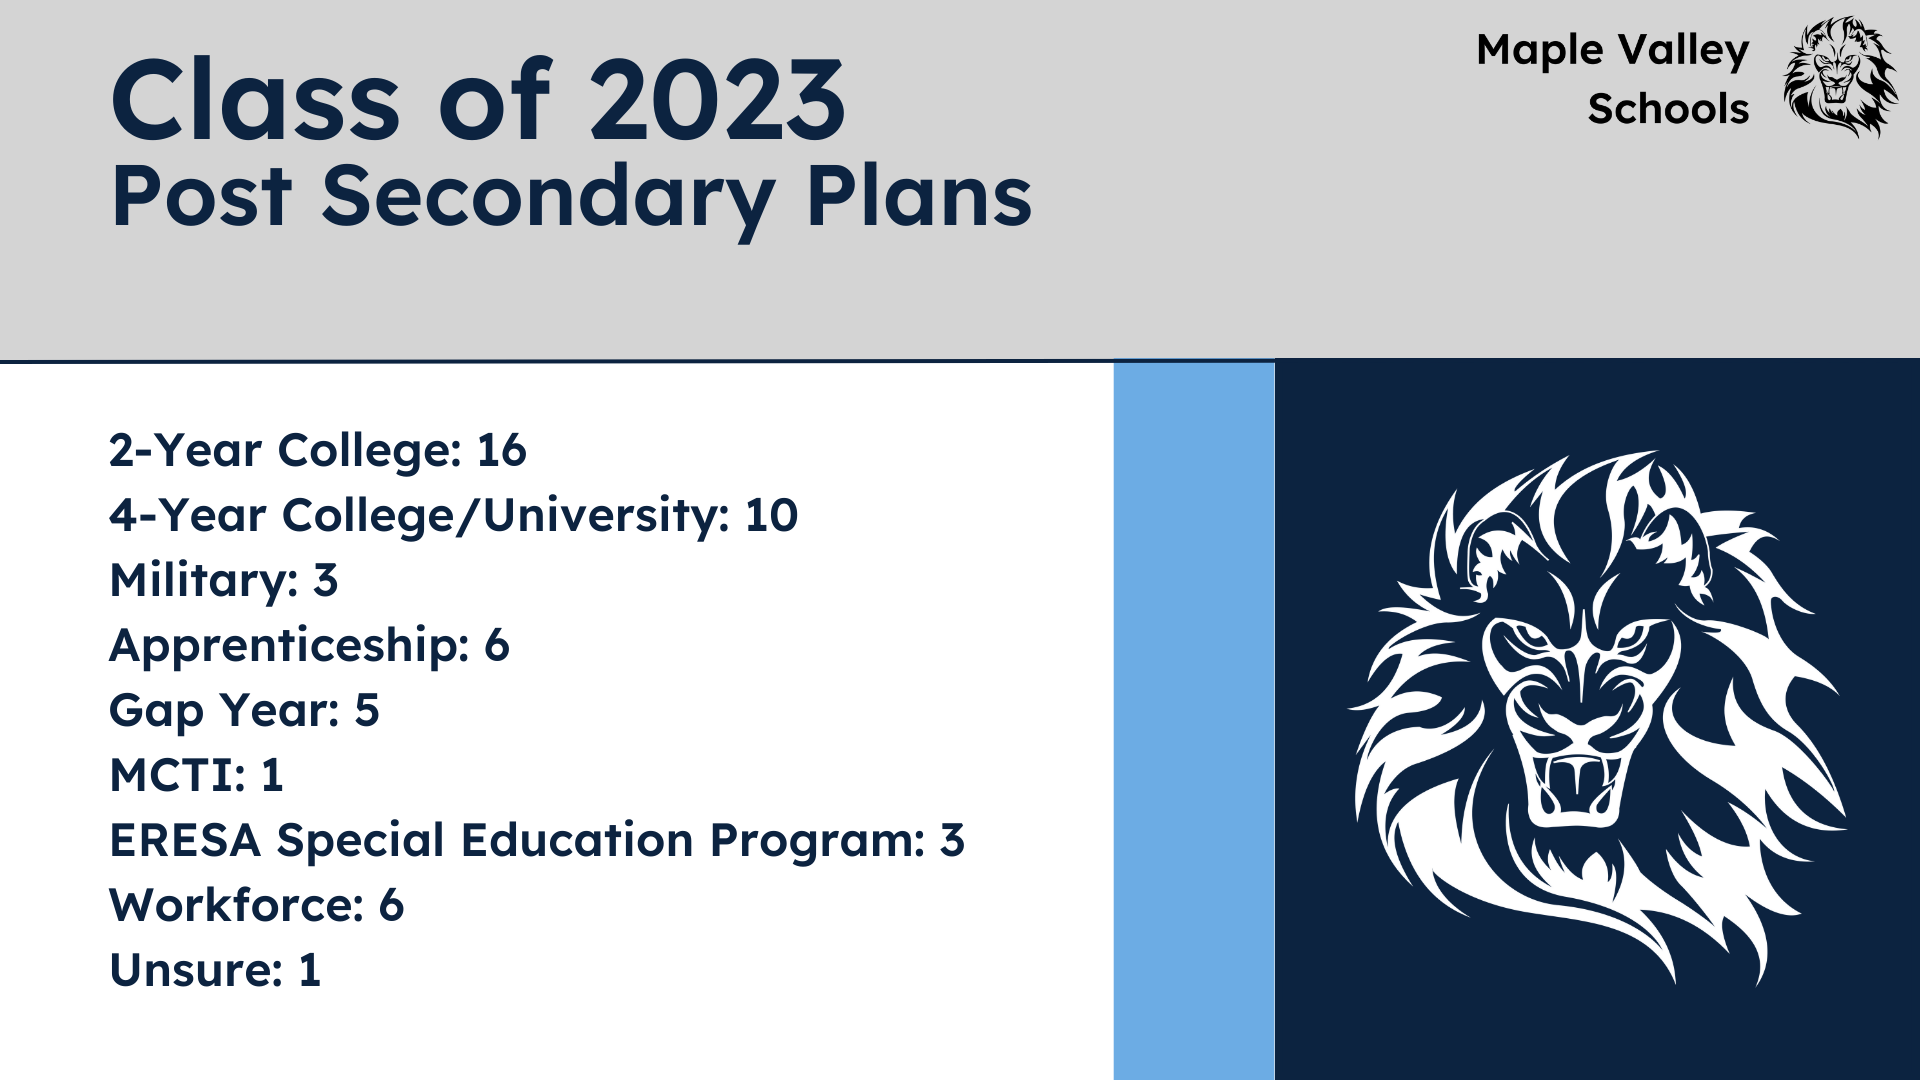 Post Secondary Plans for the Class of 2023 2-Year College: 16 4-Year College/University: 10 Military: 3 Apprenticeship: 6 Gap Year: 5 MCTI: 1 ERESA Special Education Program: 3 Workforce: 6 Unsure: 1